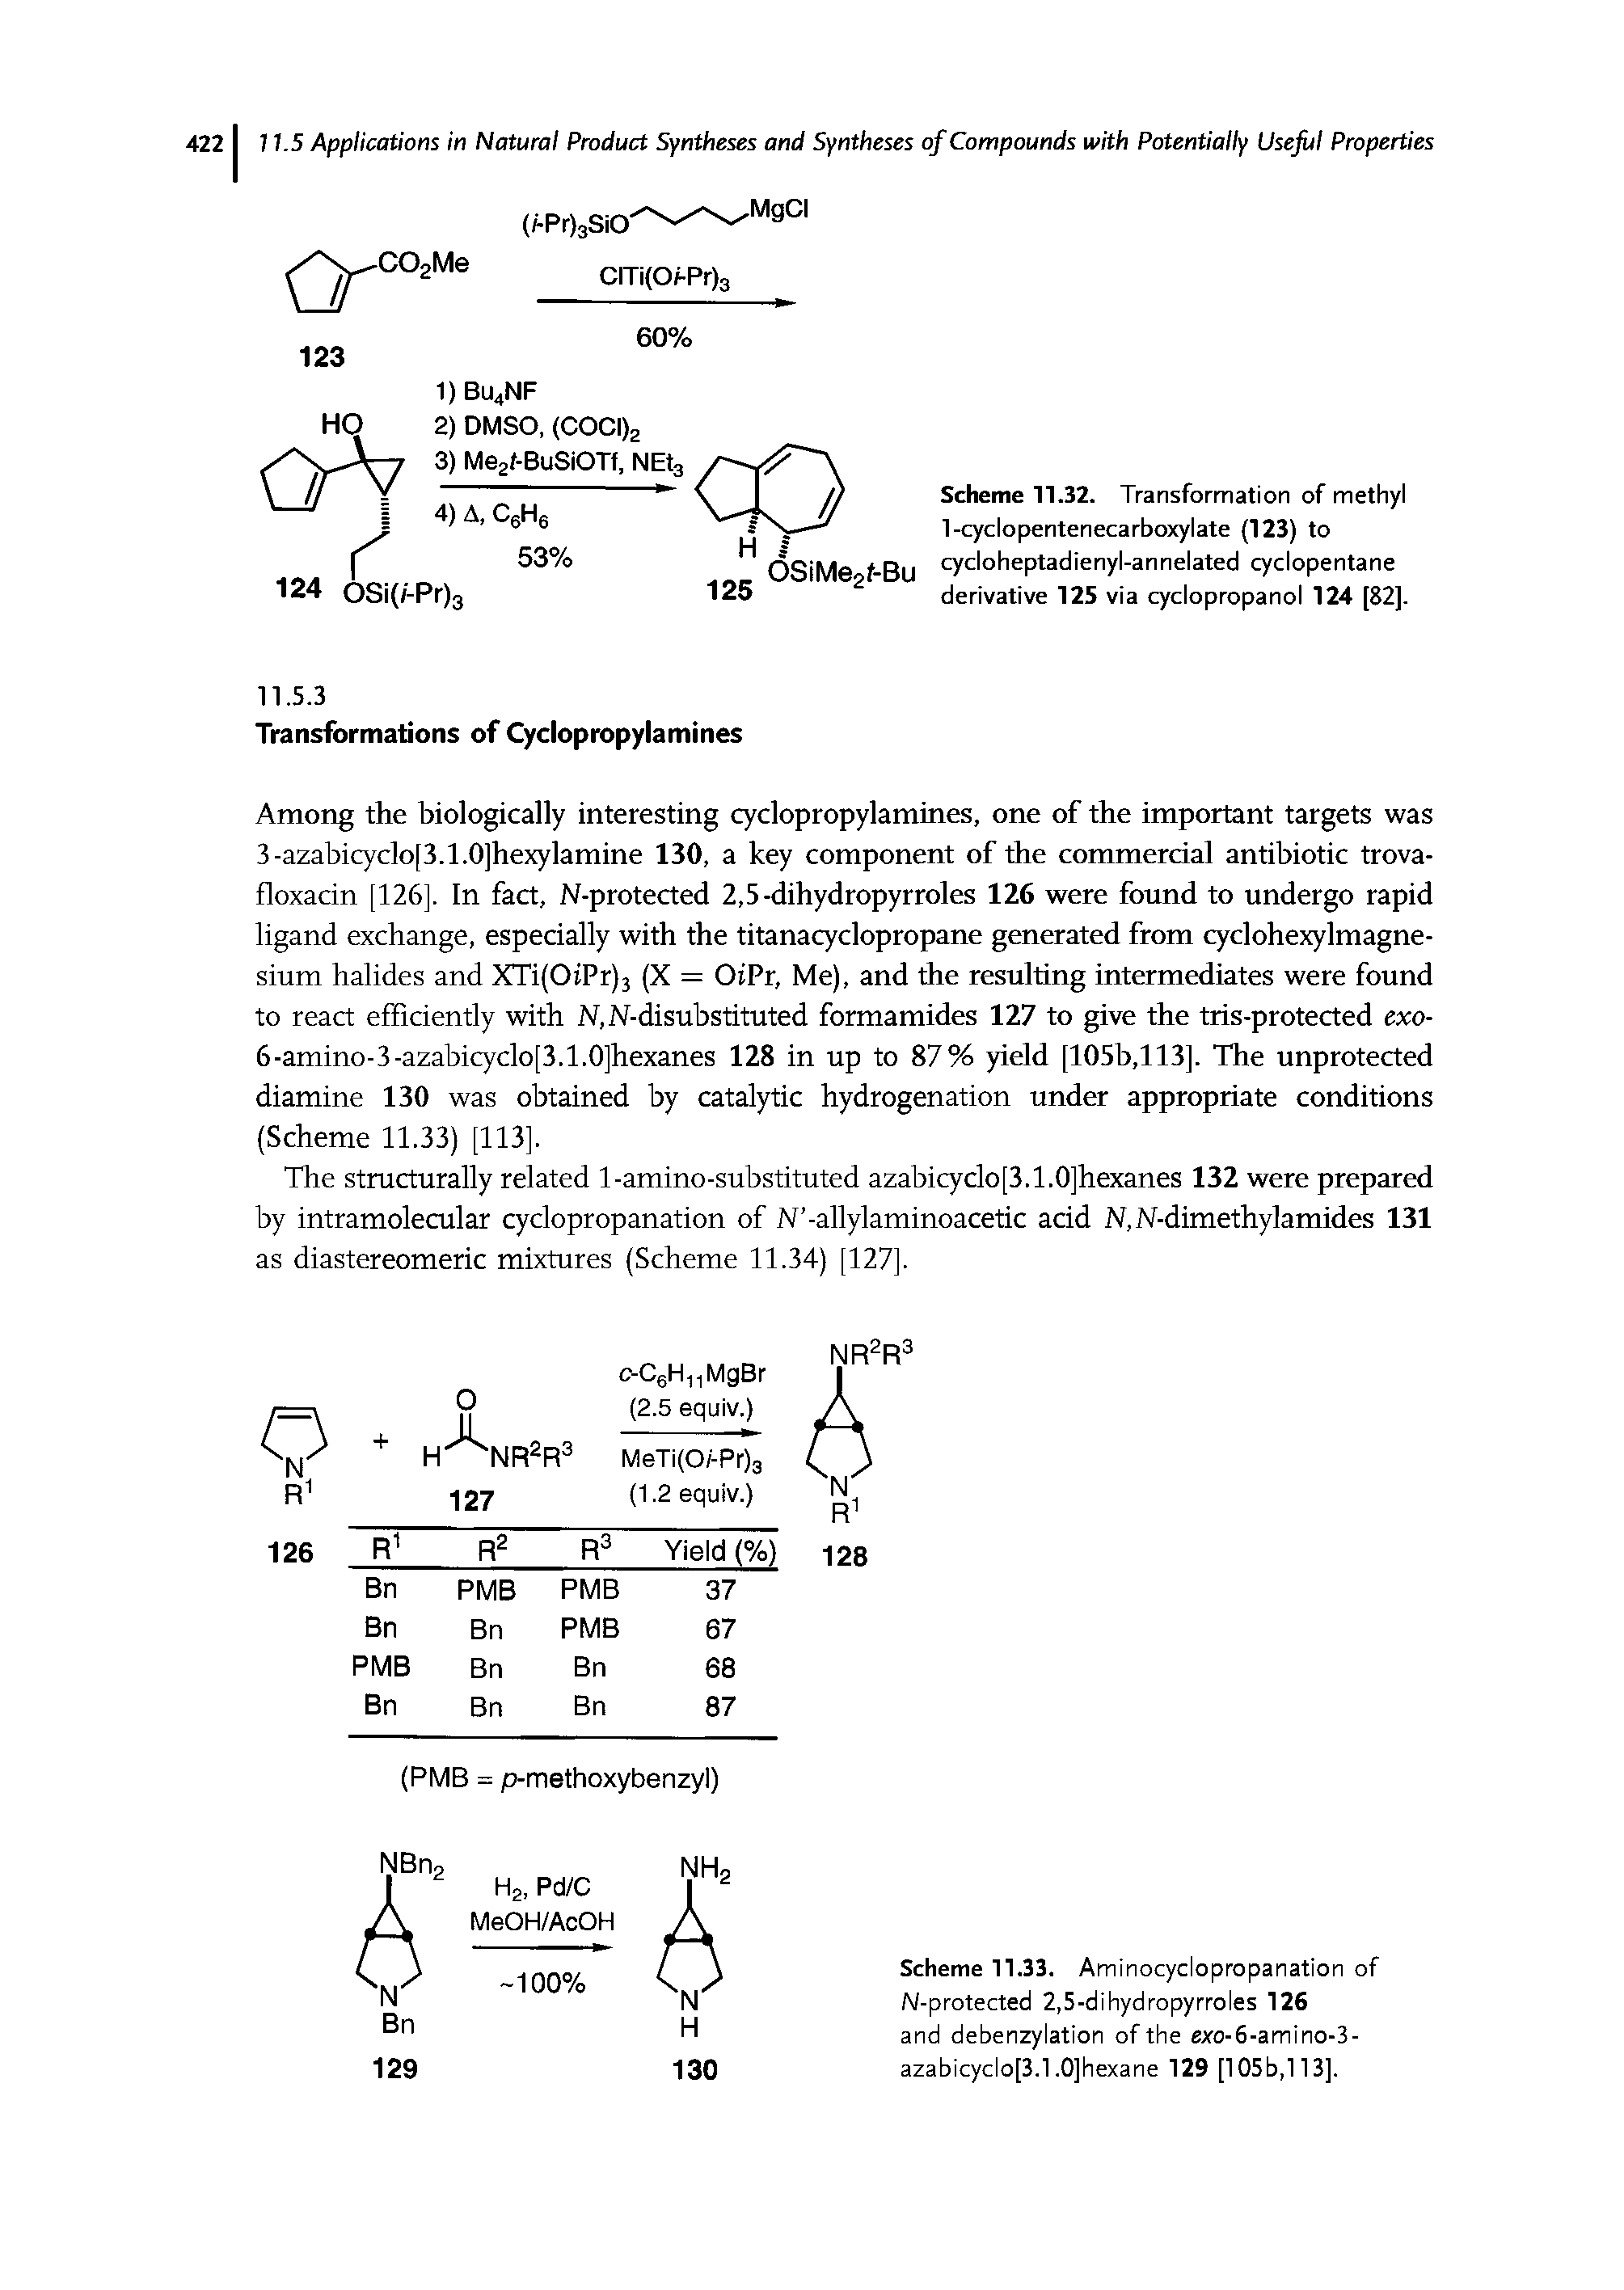 Scheme 11.32. Transformation of methyl 1-cyclopentenecarboxylate (123) to cycloheptadienyl-annelated cyclopentane derivative 125 via cyclopropanol 124 [82].